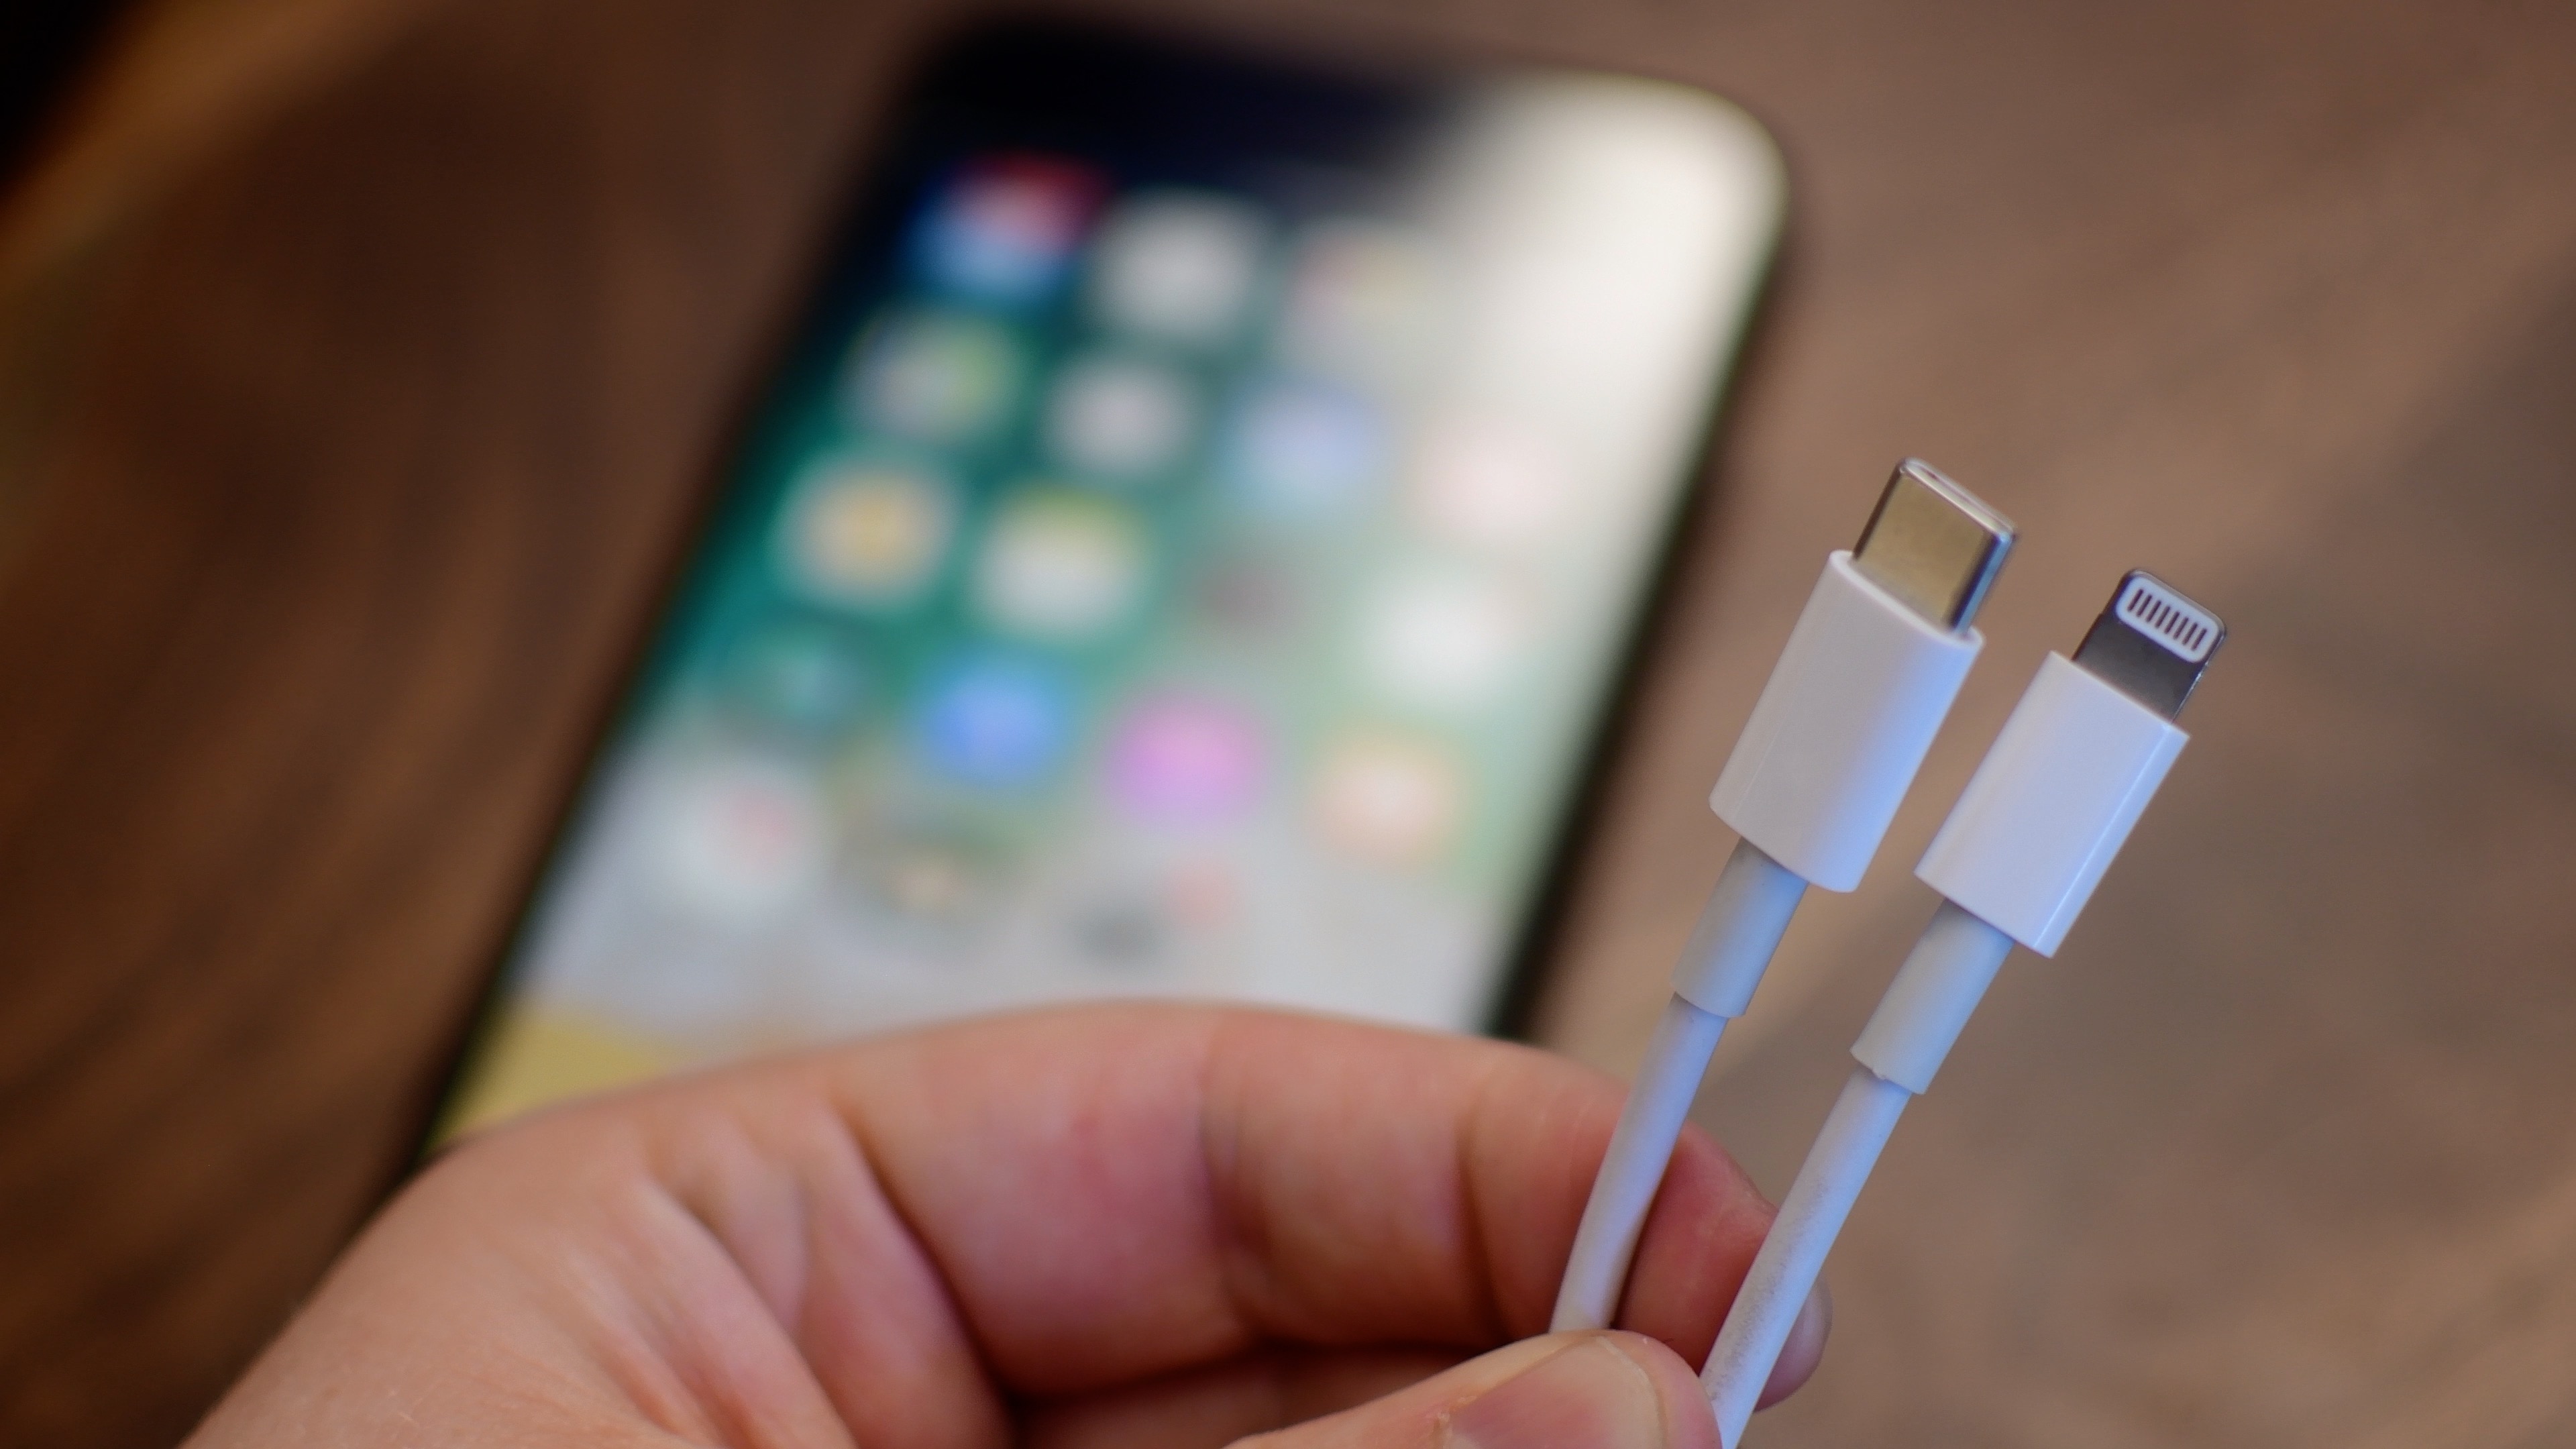 An image of a male's hand holding two cables with Lightning and USB-C connectors, set against a blurred background representing an iPhone lying facedown